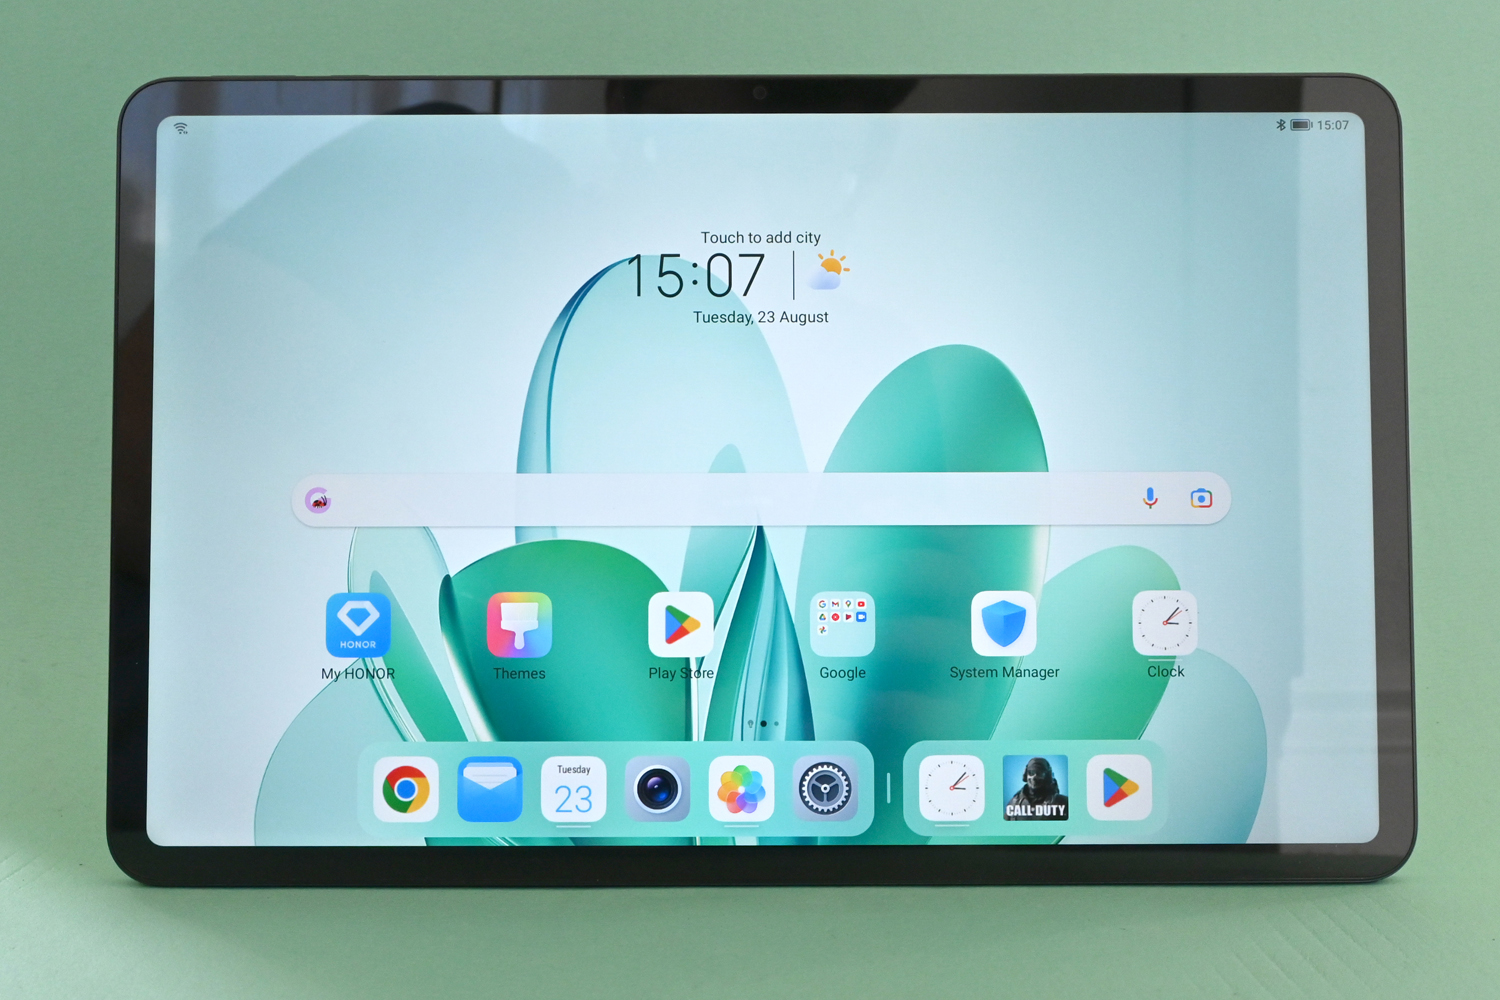 Honor Pad 8 review: An affordable and capable 12-inch Android